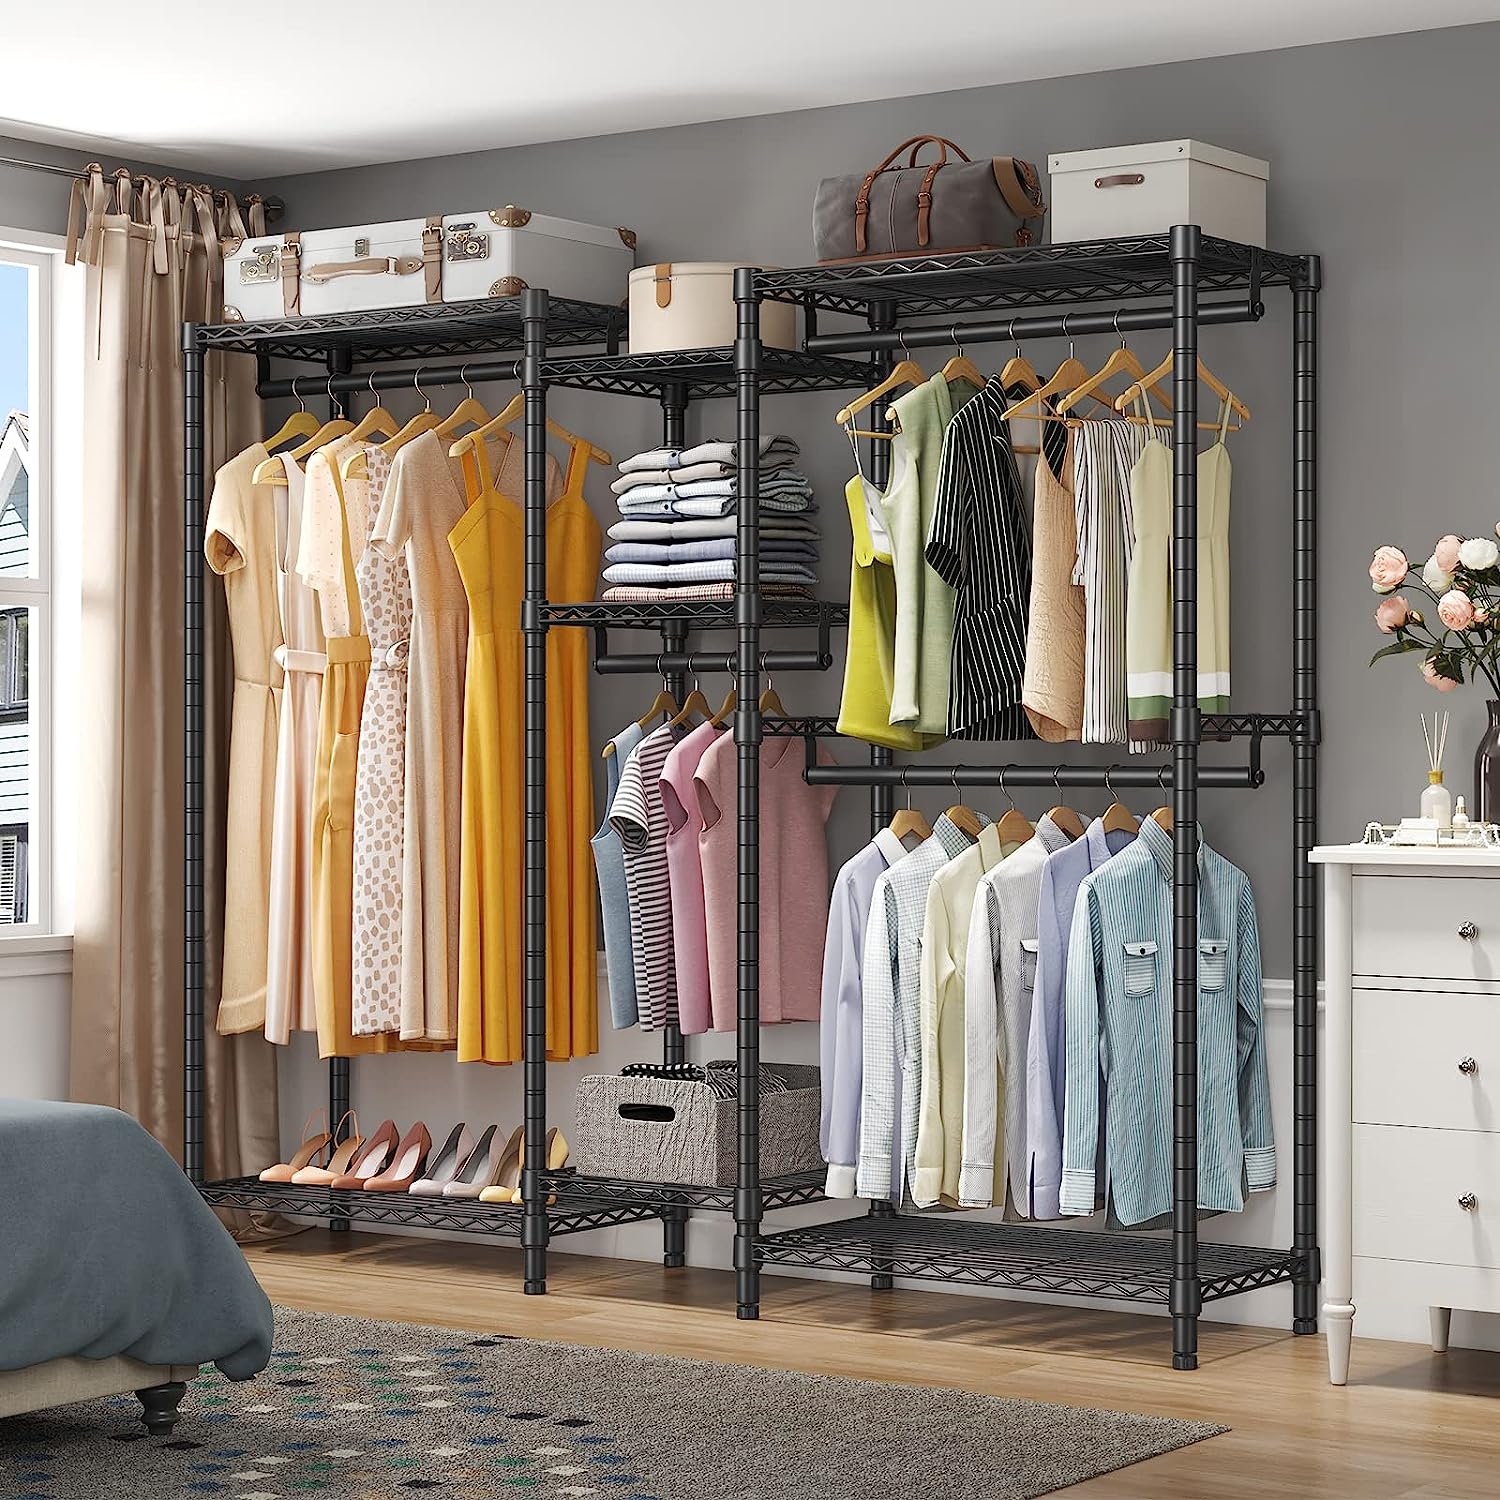 How To Maximize Small Closet Space